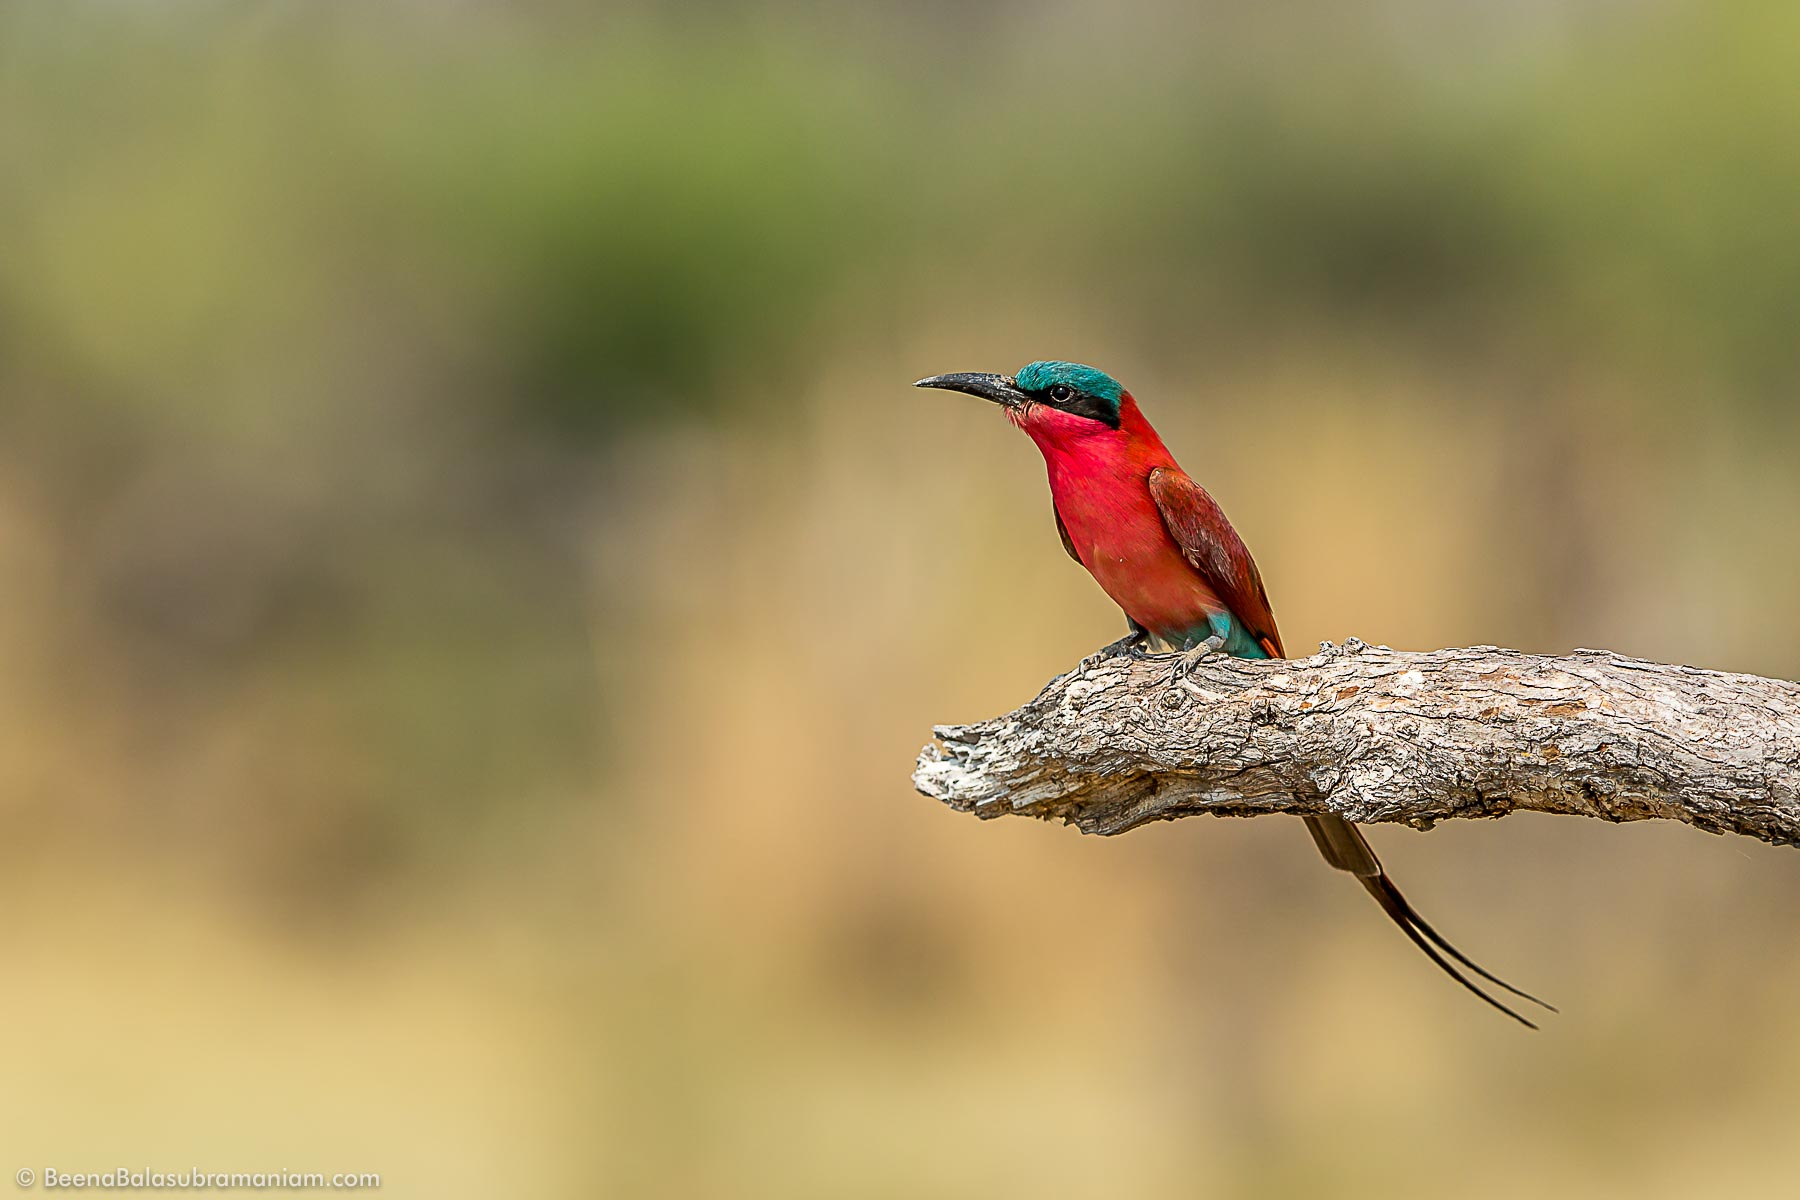 The southern carmine bee-eater